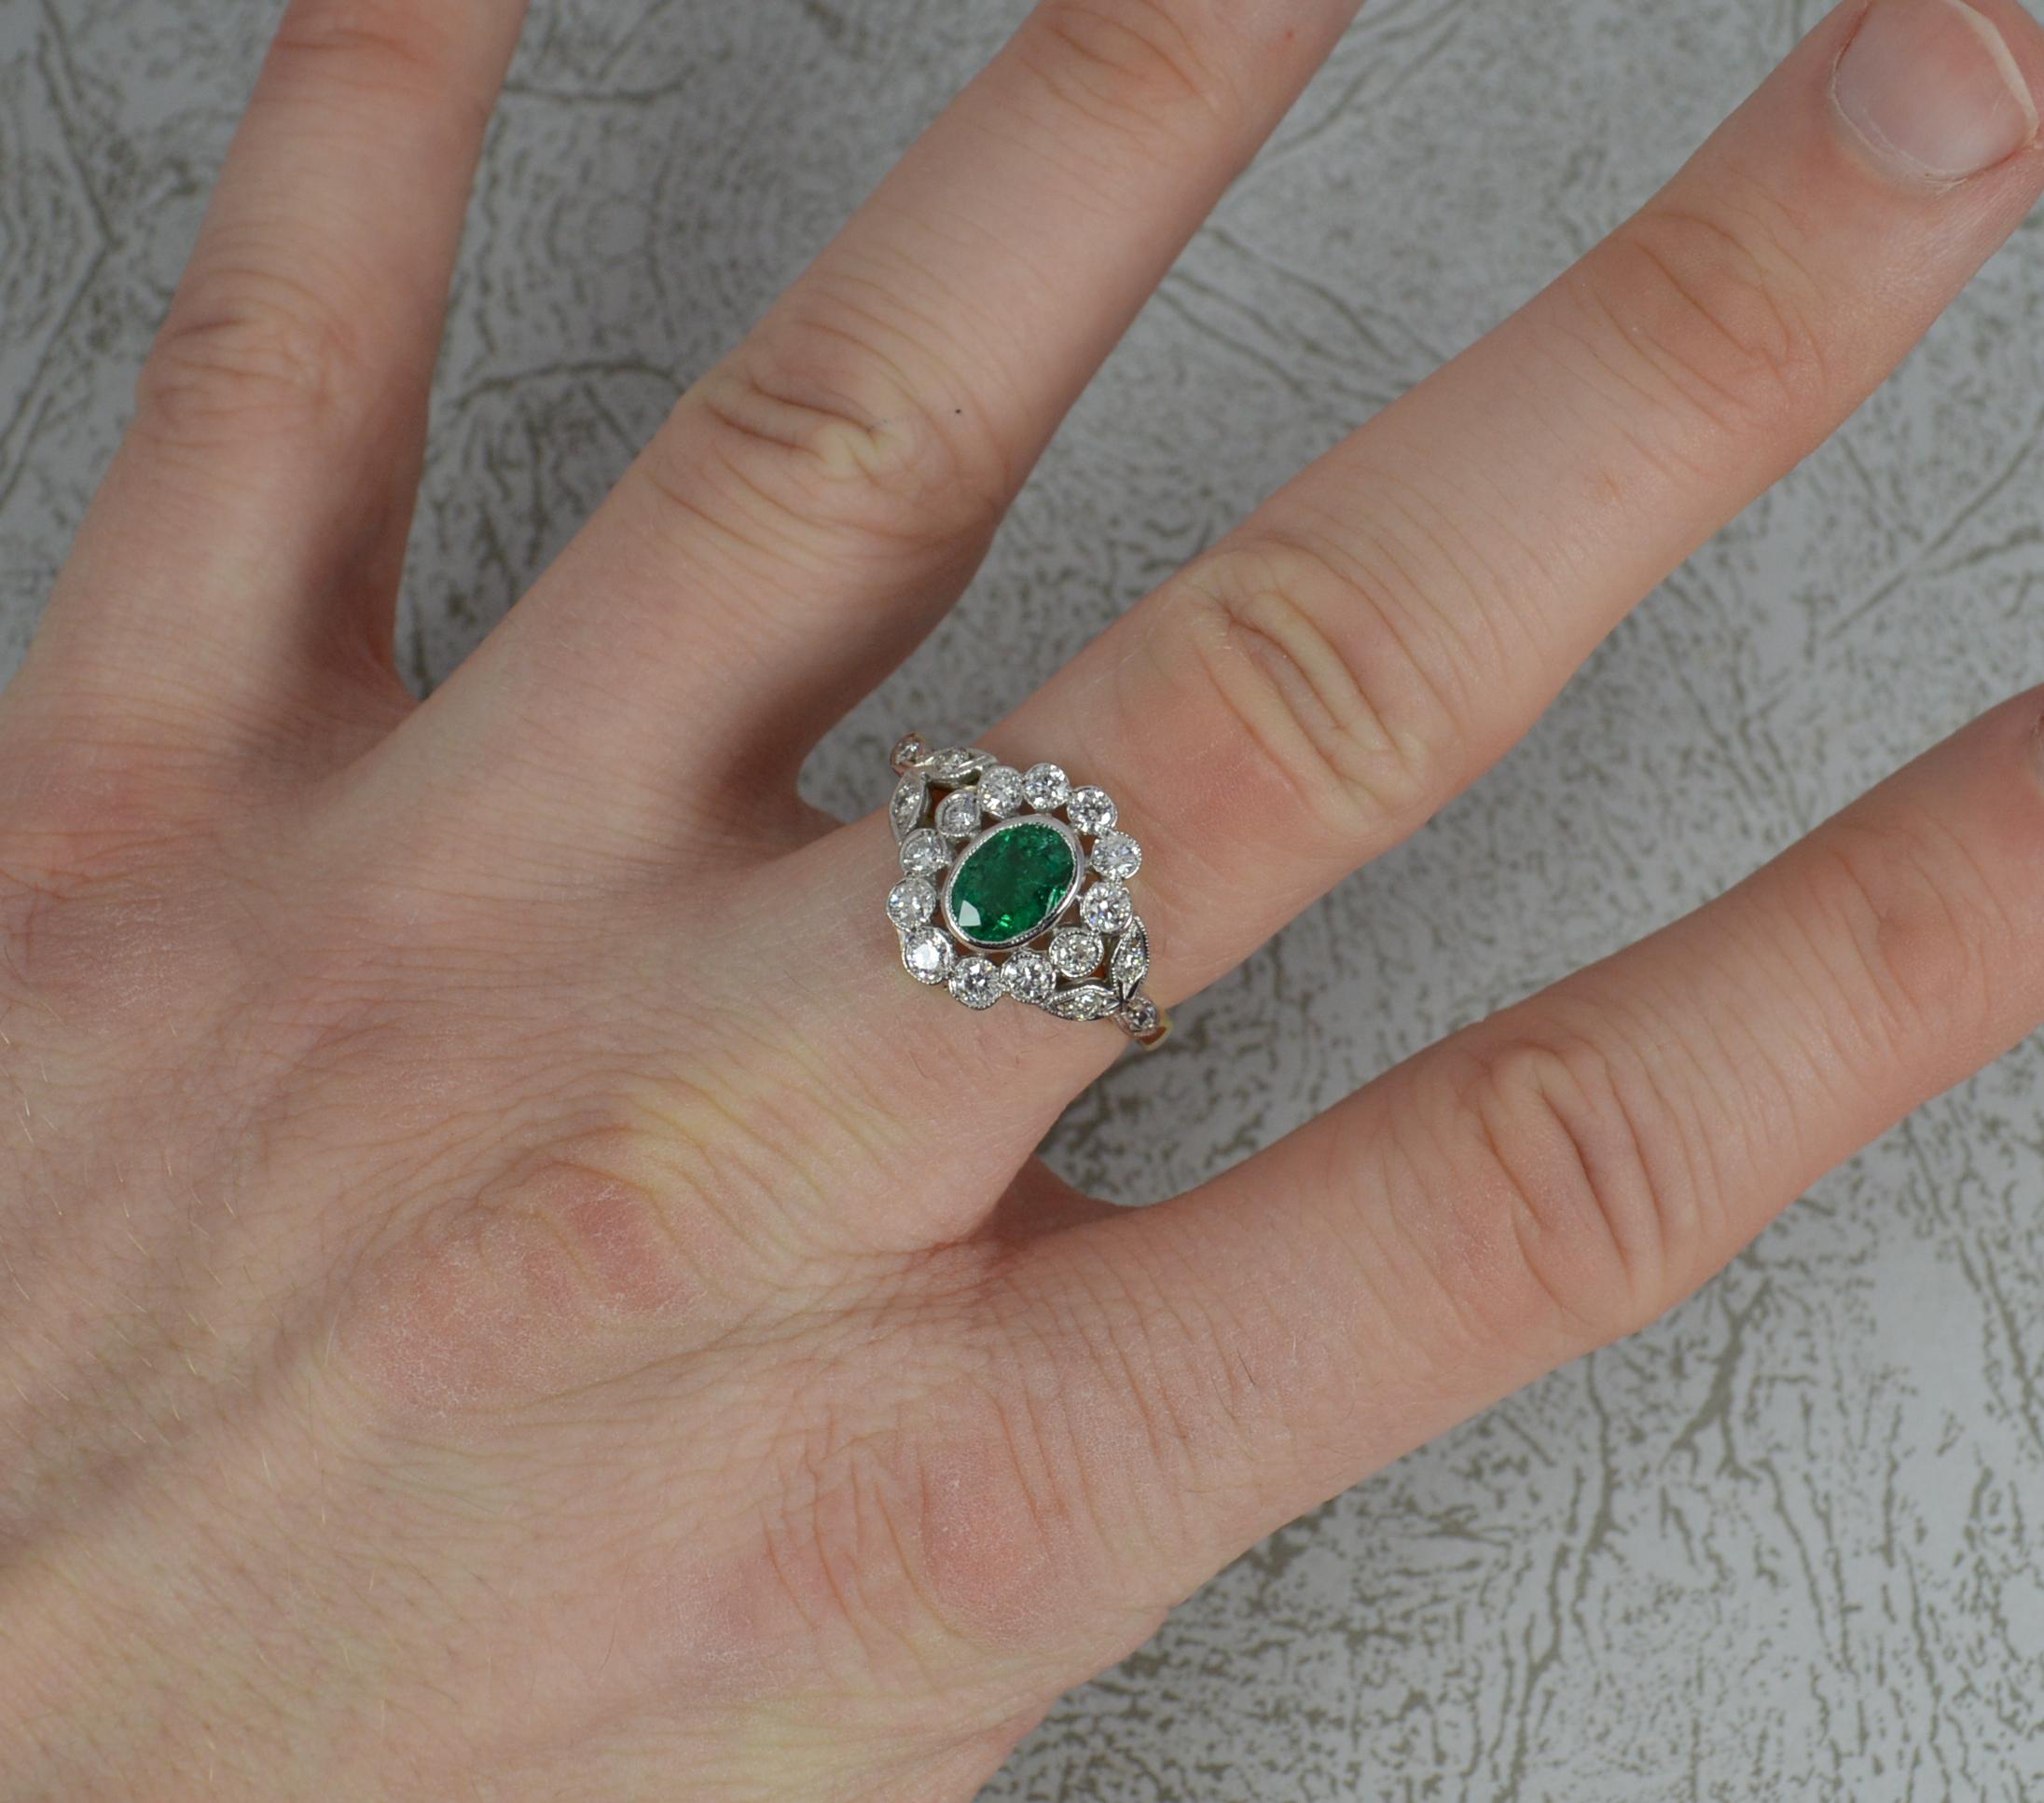 A stunning Emerald and Diamond cluster ring.
Modelled in 18 carat yellow gold with a platinum head setting..
Designed with a natural emerald to centre in full grain bezel setting. 7.3mm x 5.4mm approx.
Surrounding is a full border of smaller round